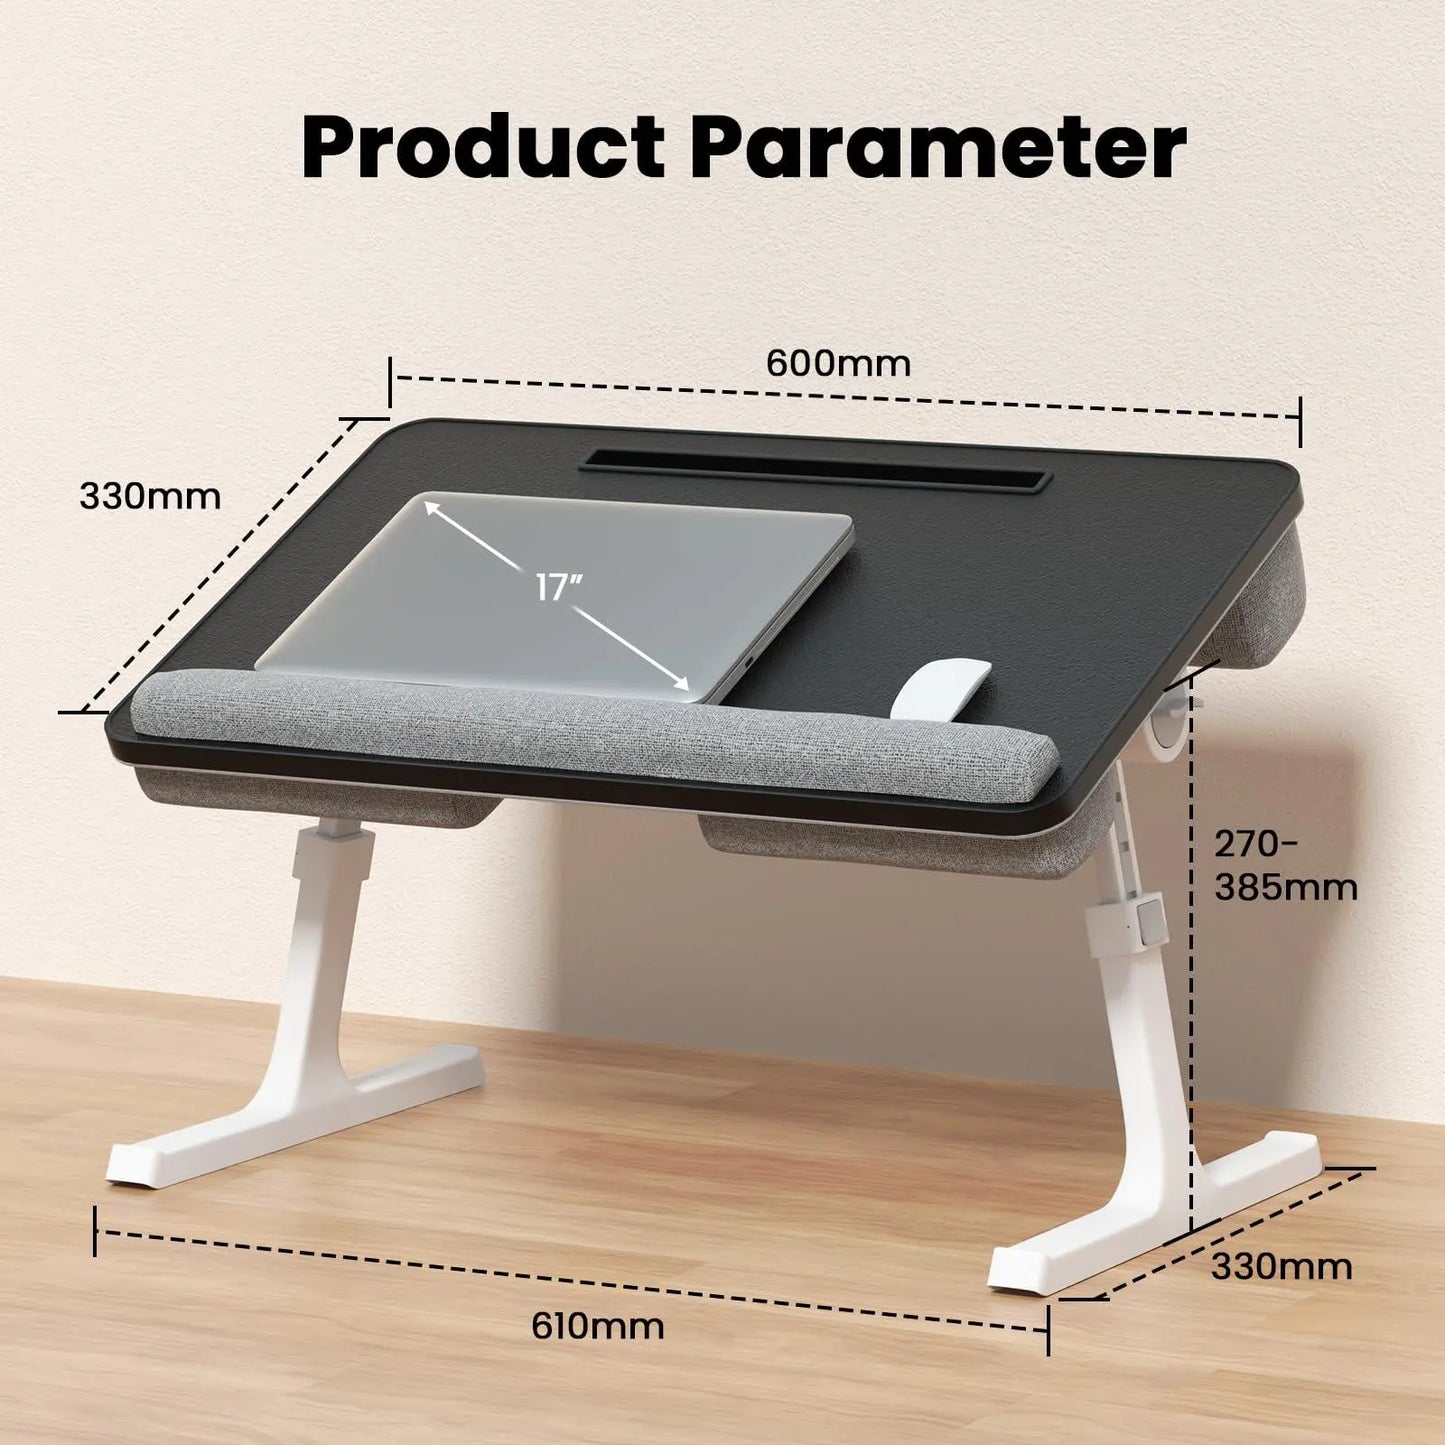 PUTORSEN laptop table & laptop cushion for bed and sofa, with carabiner for locking, unnecessary mouse pads, height-adjustable laptop stand bed, fits up to 17" laptop, 60.7 * 37cm PUTORSEN